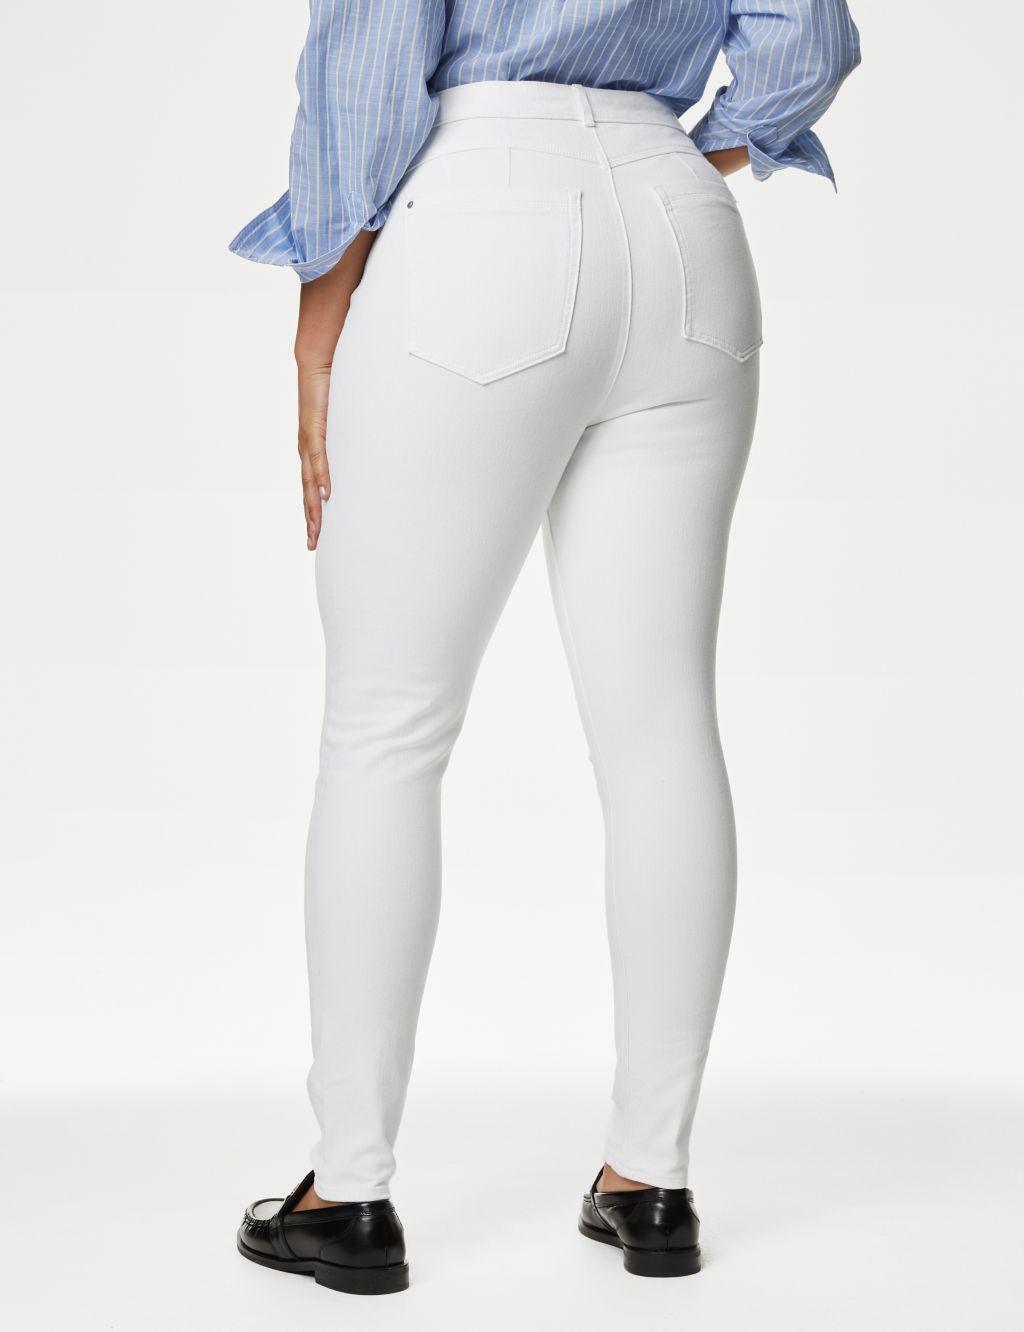 Magic Shaping High Waisted Skinny Jeans image 5